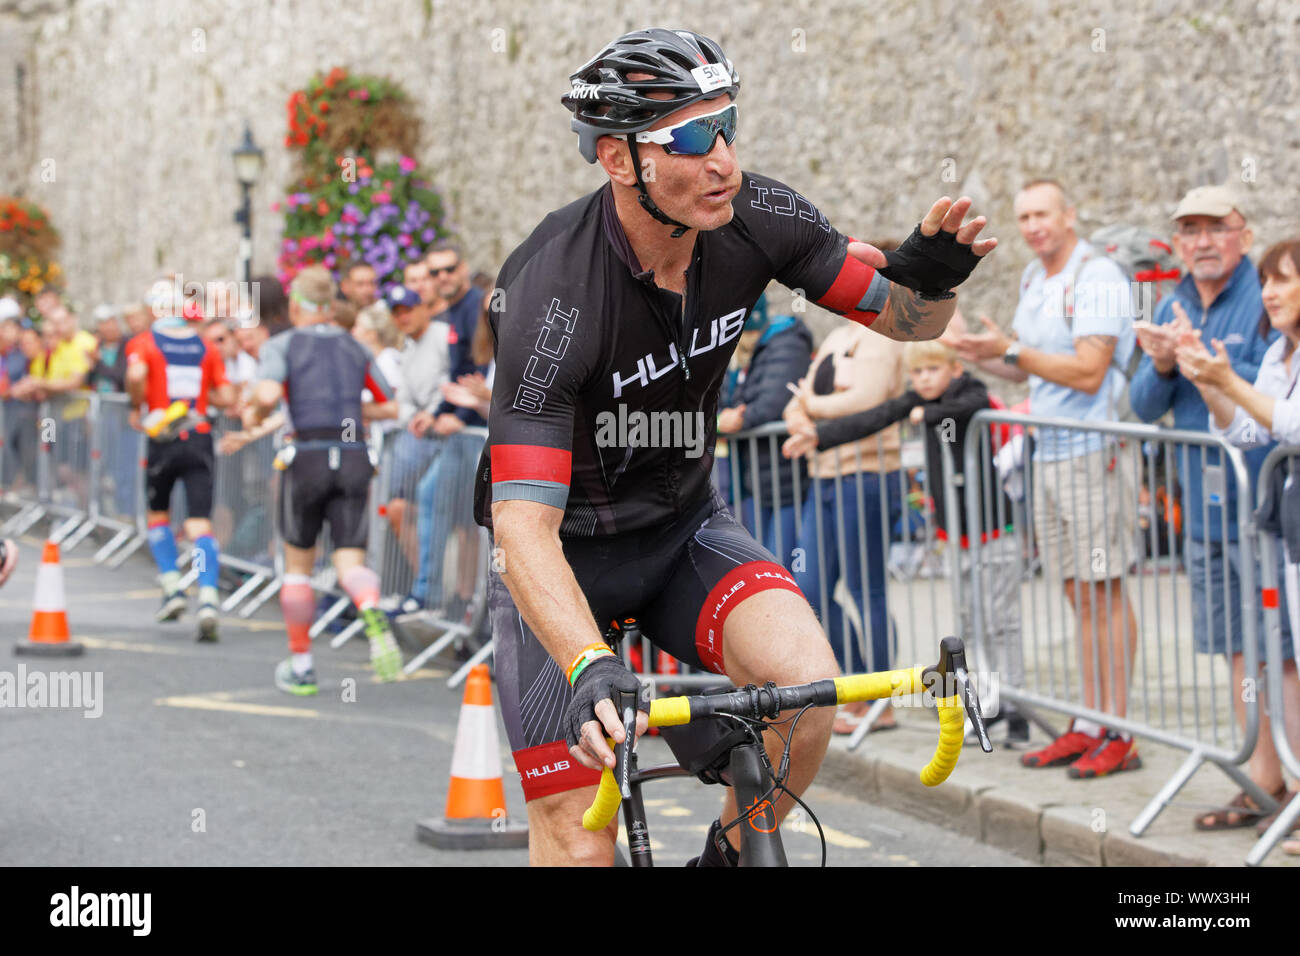 Tenby, UK. 15th Sep, 2019. Pictured: Gareth Thomas sends kisses to fans during the last mile of the cycle race. Sunday 15 September 2019 Re: Ironman triathlon event in Tenby, Wales, UK. Credit: ATHENA PICTURE AGENCY LTD/Alamy Live News Stock Photo